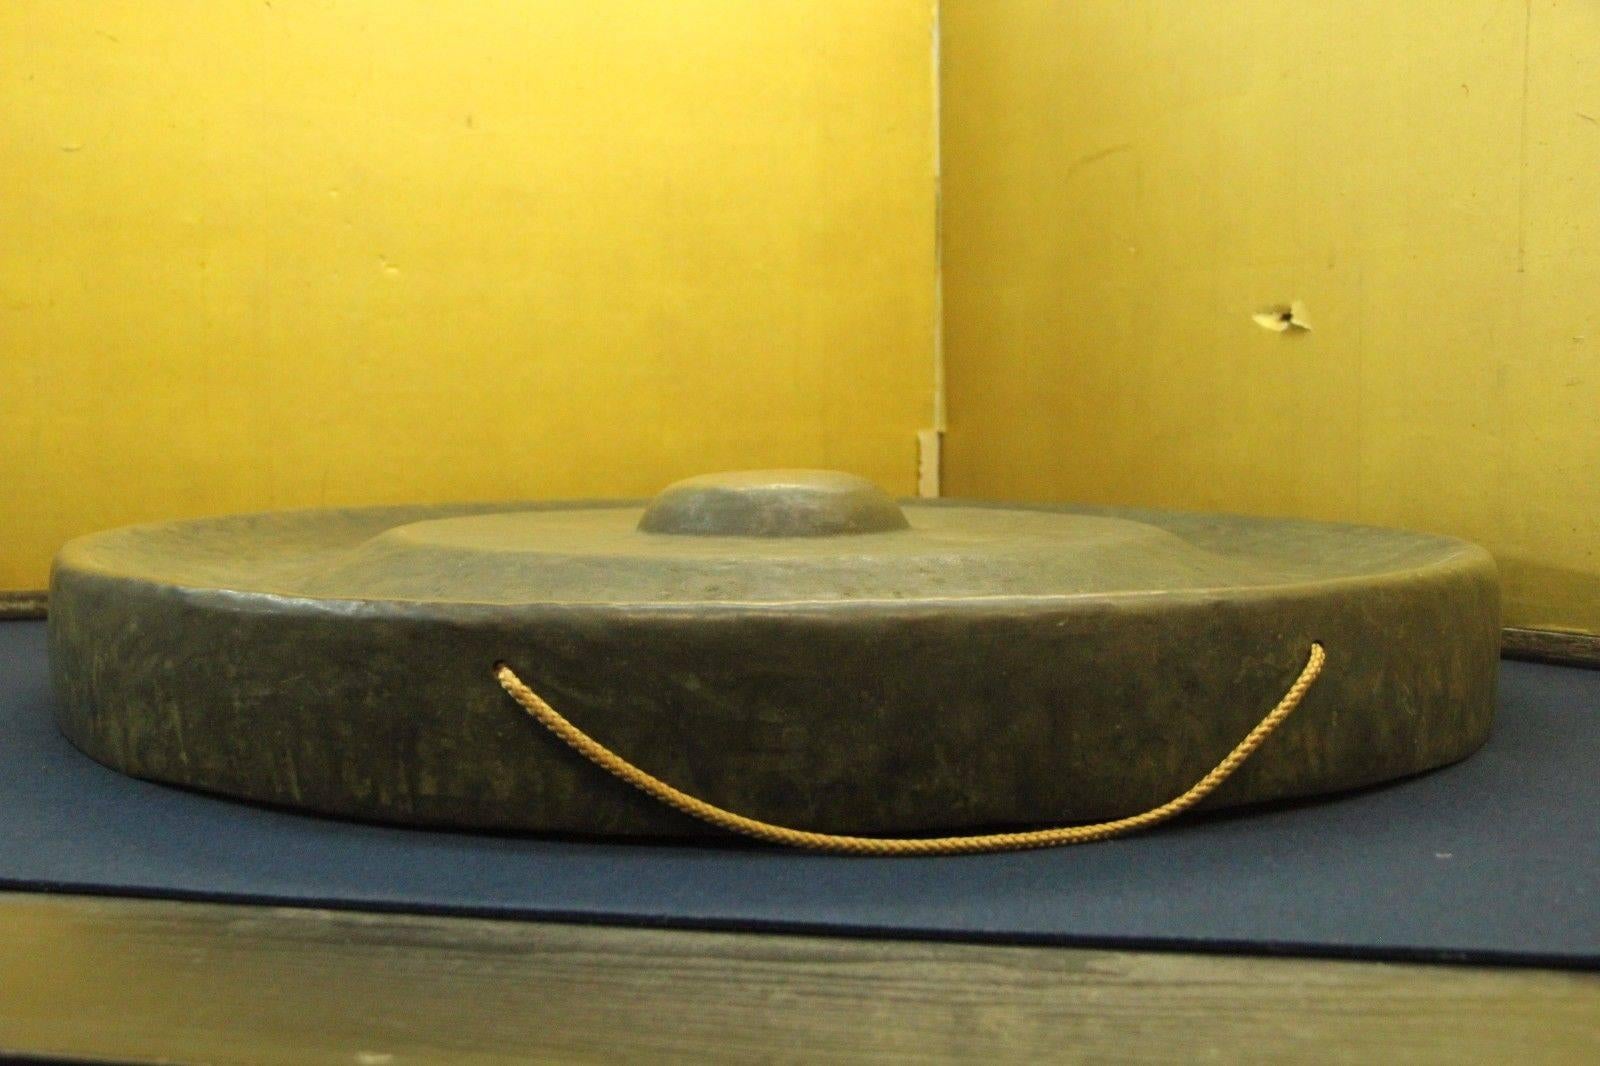 japanese gong sound